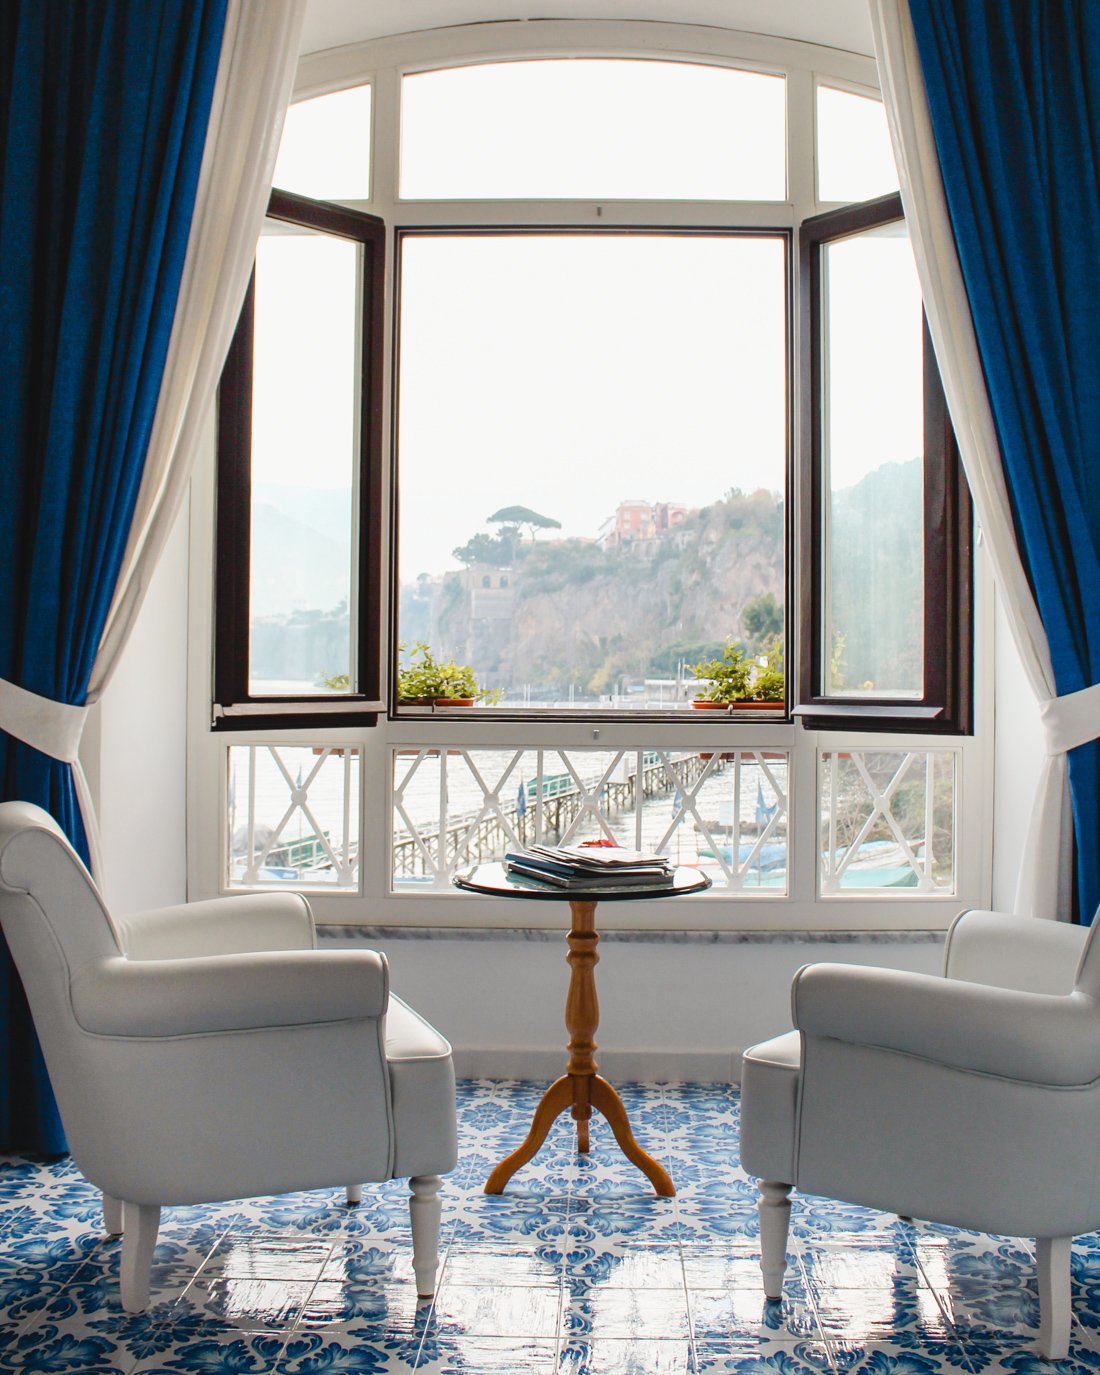 Surriento Suites: Hotels in Italy: What to expect and tips for booking the best hotel. Travel Tips | Italy Hotels | #italy #traveltips